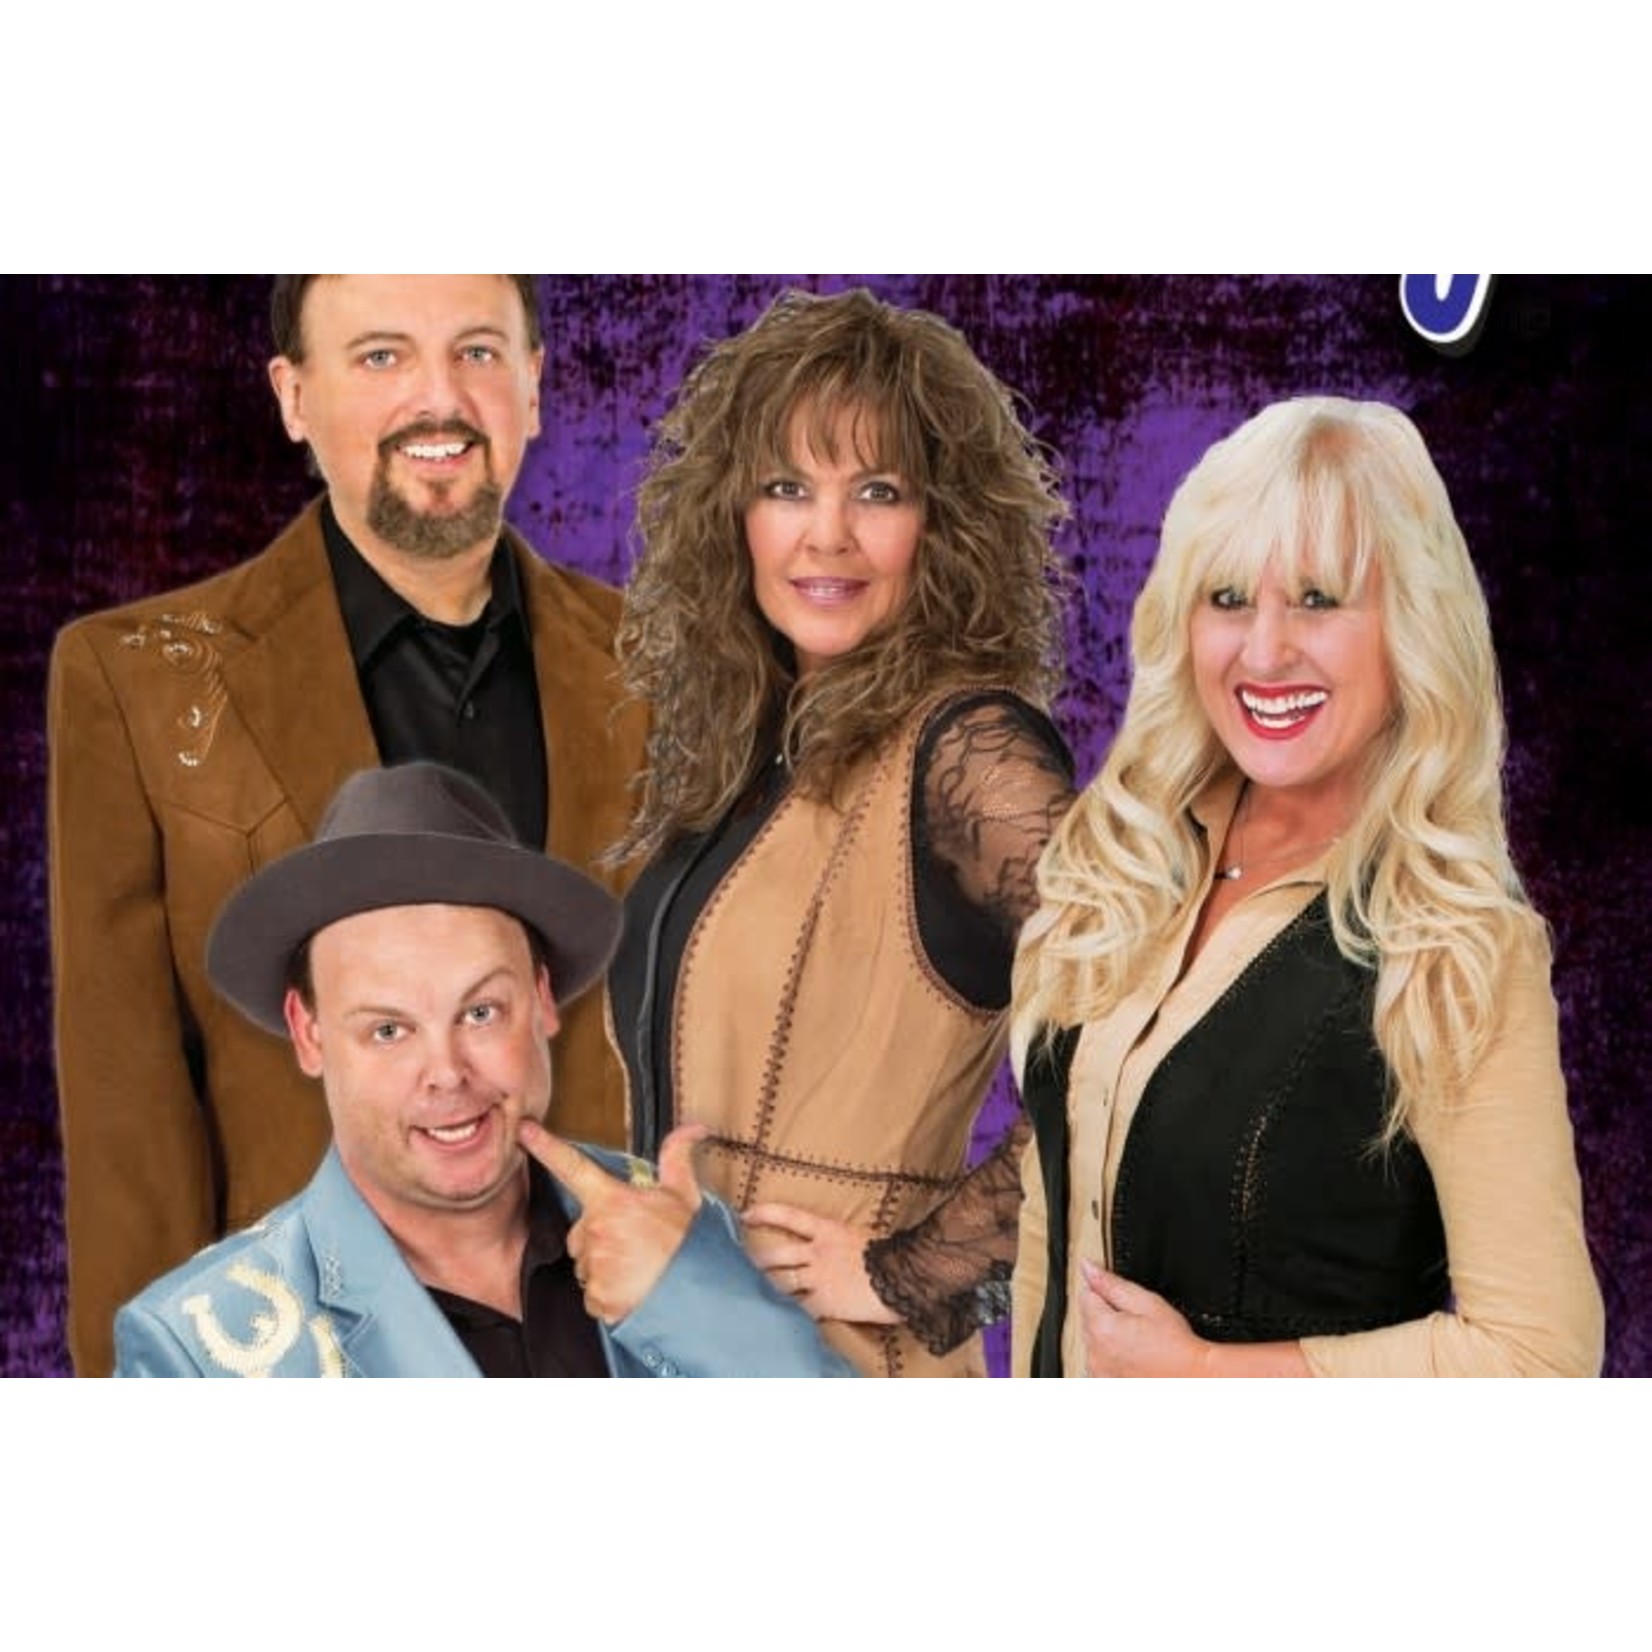 MO-Branson-Grand Country Music Hall Show MO-Branson-Grand Country Music Hall Show $95.10 Pair of Tickets to Ozarks Country Show